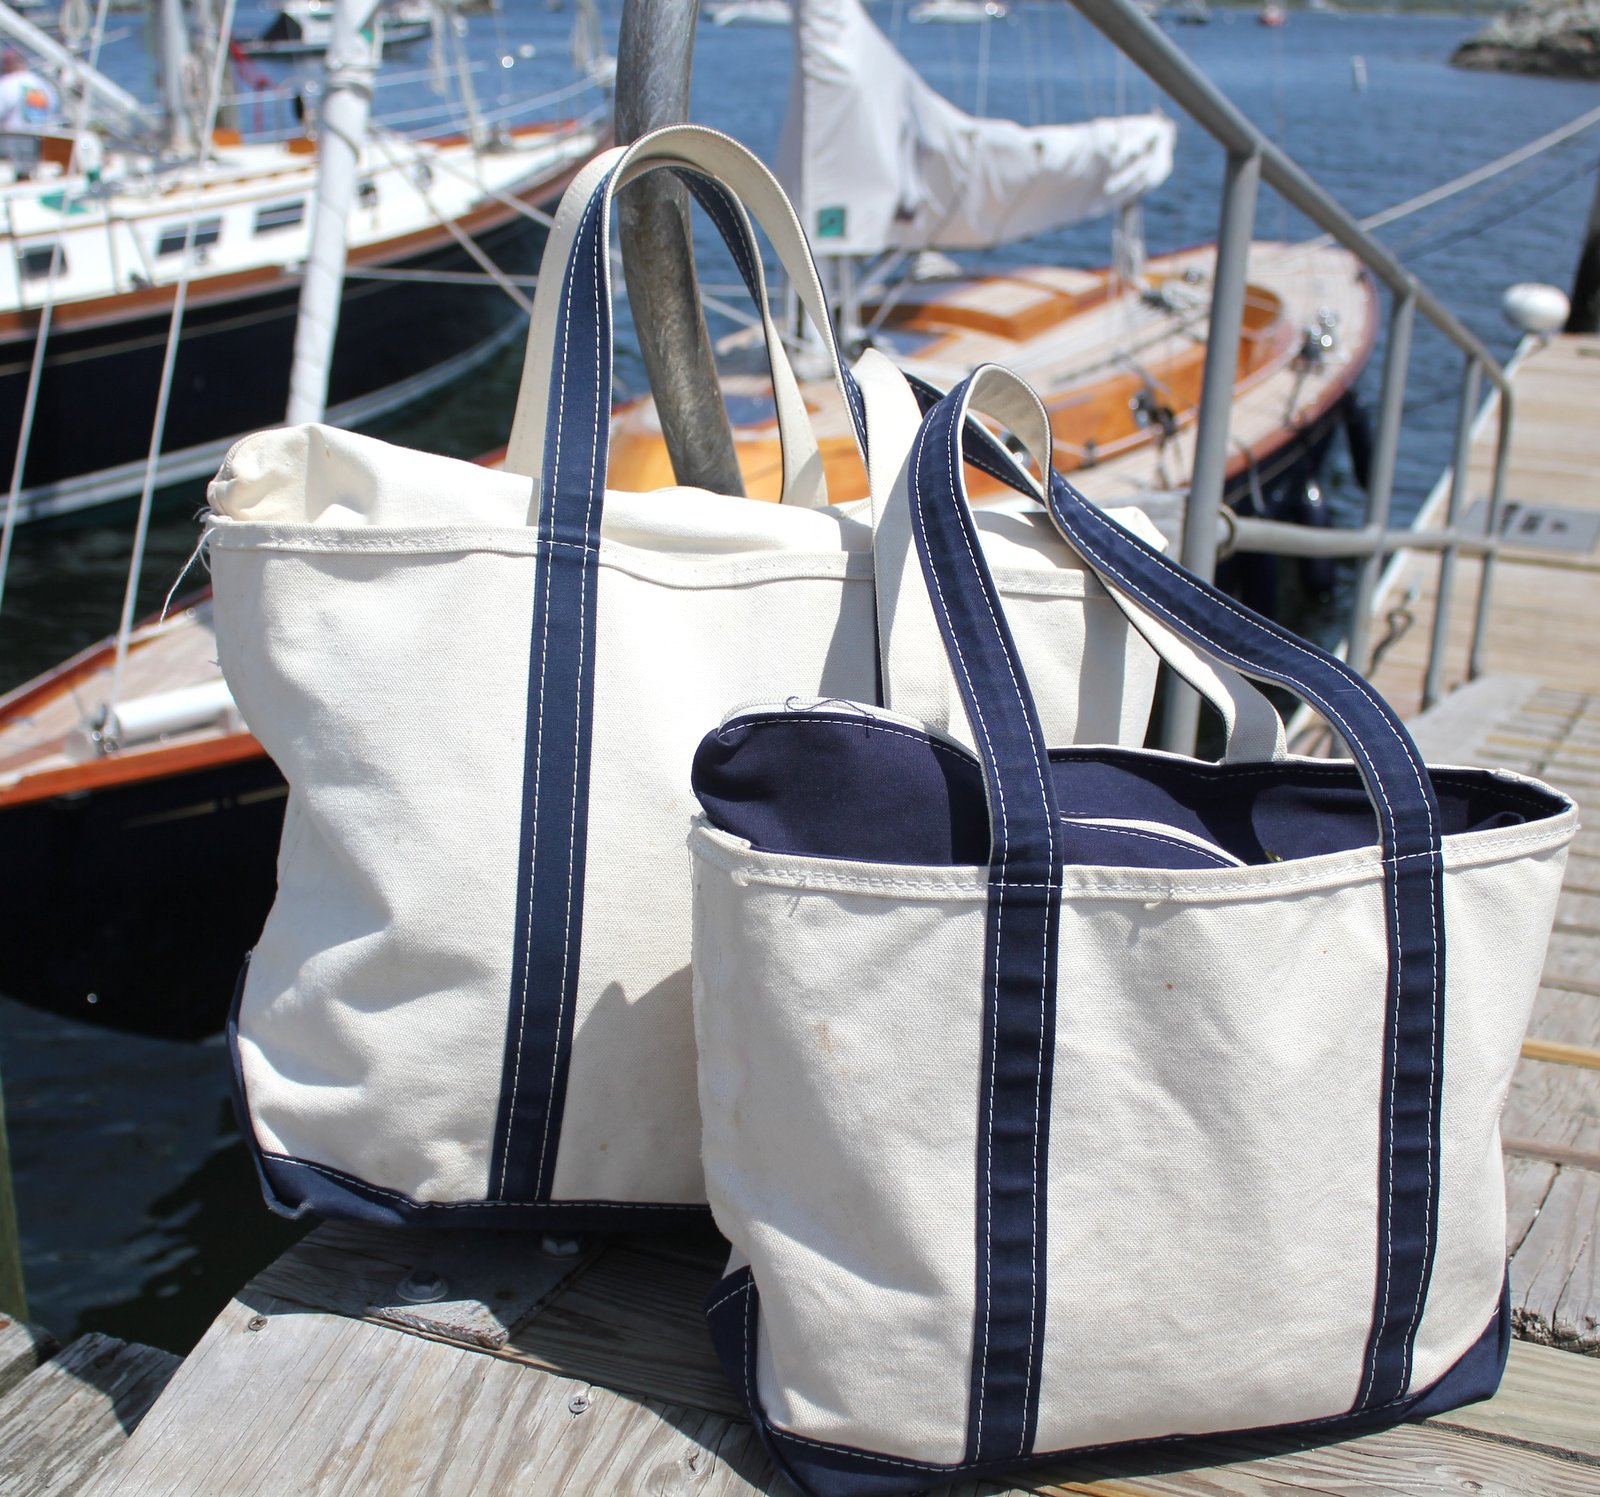 boat and tote monogram ideas